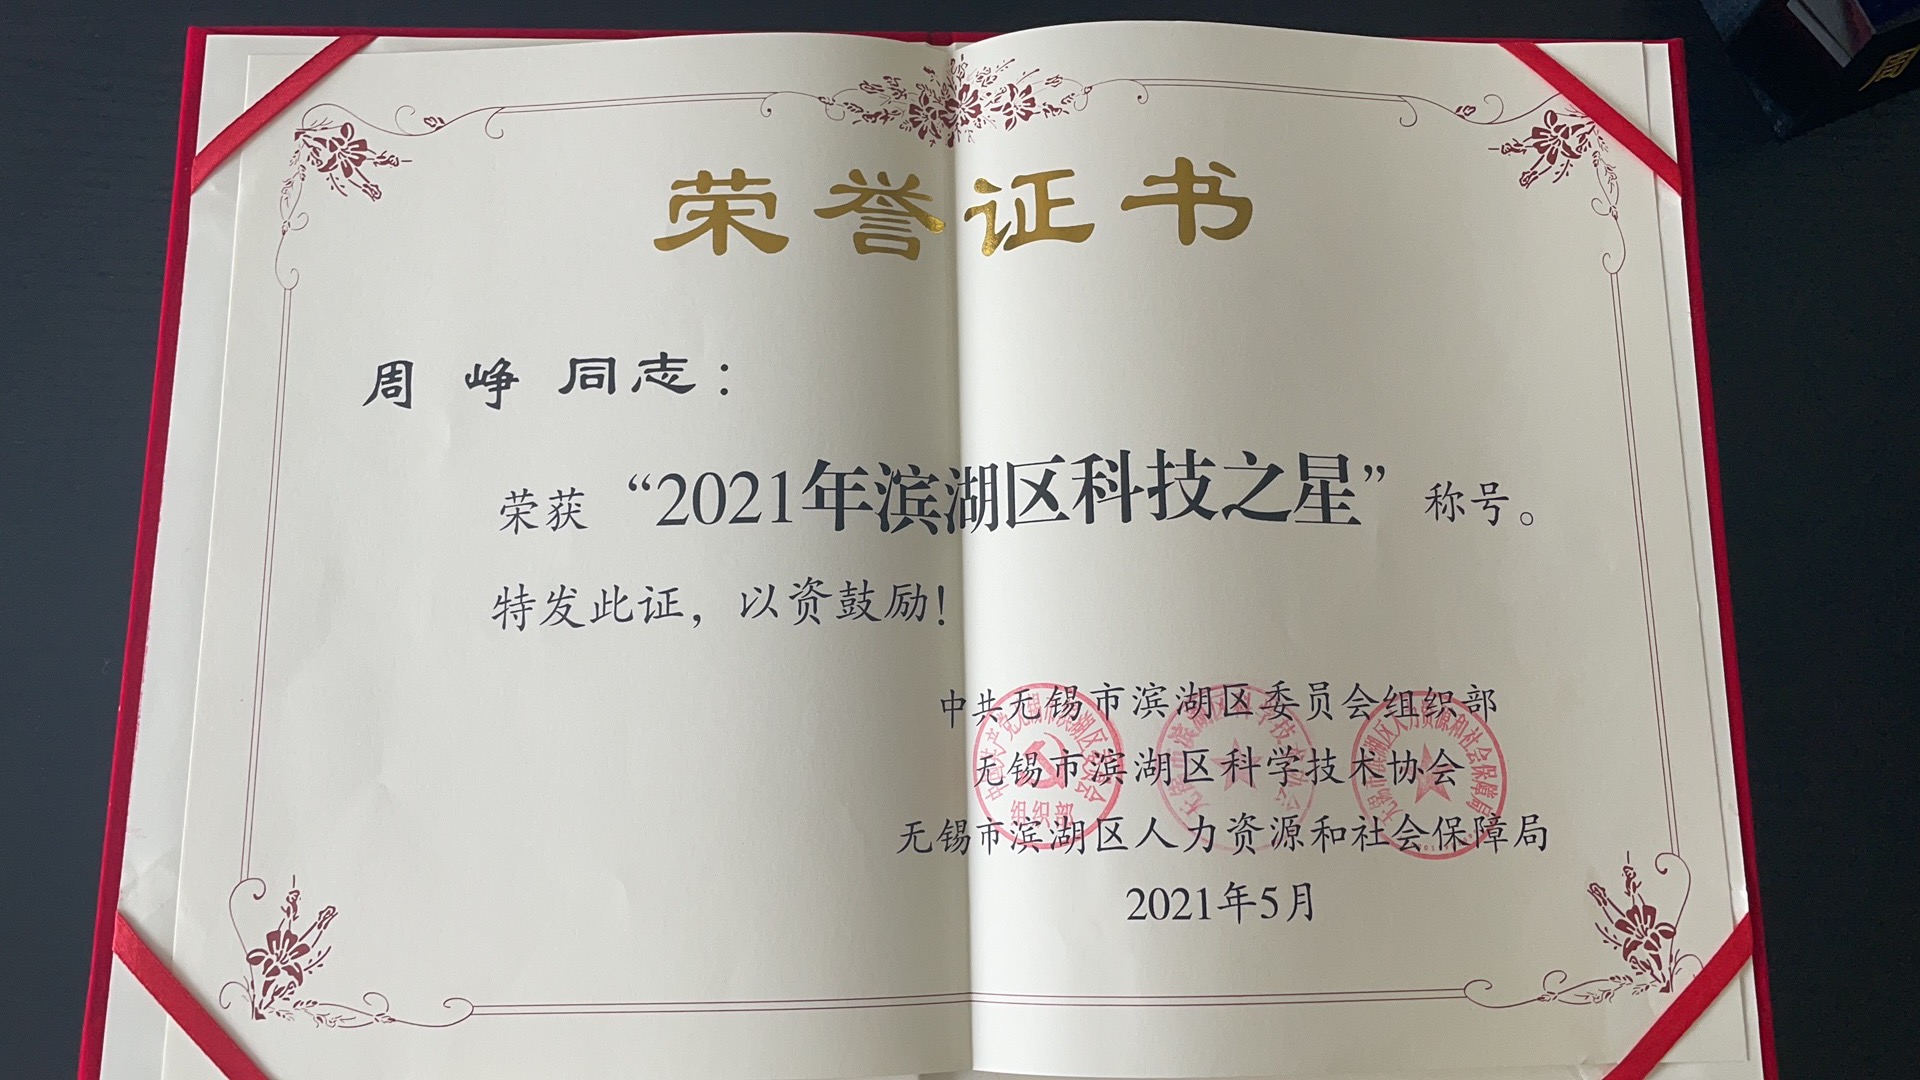 Good news! Zhou Zheng, CEO of Ninecosmos Science And Technology, won the title of "2021 Binhu District Technology Star"